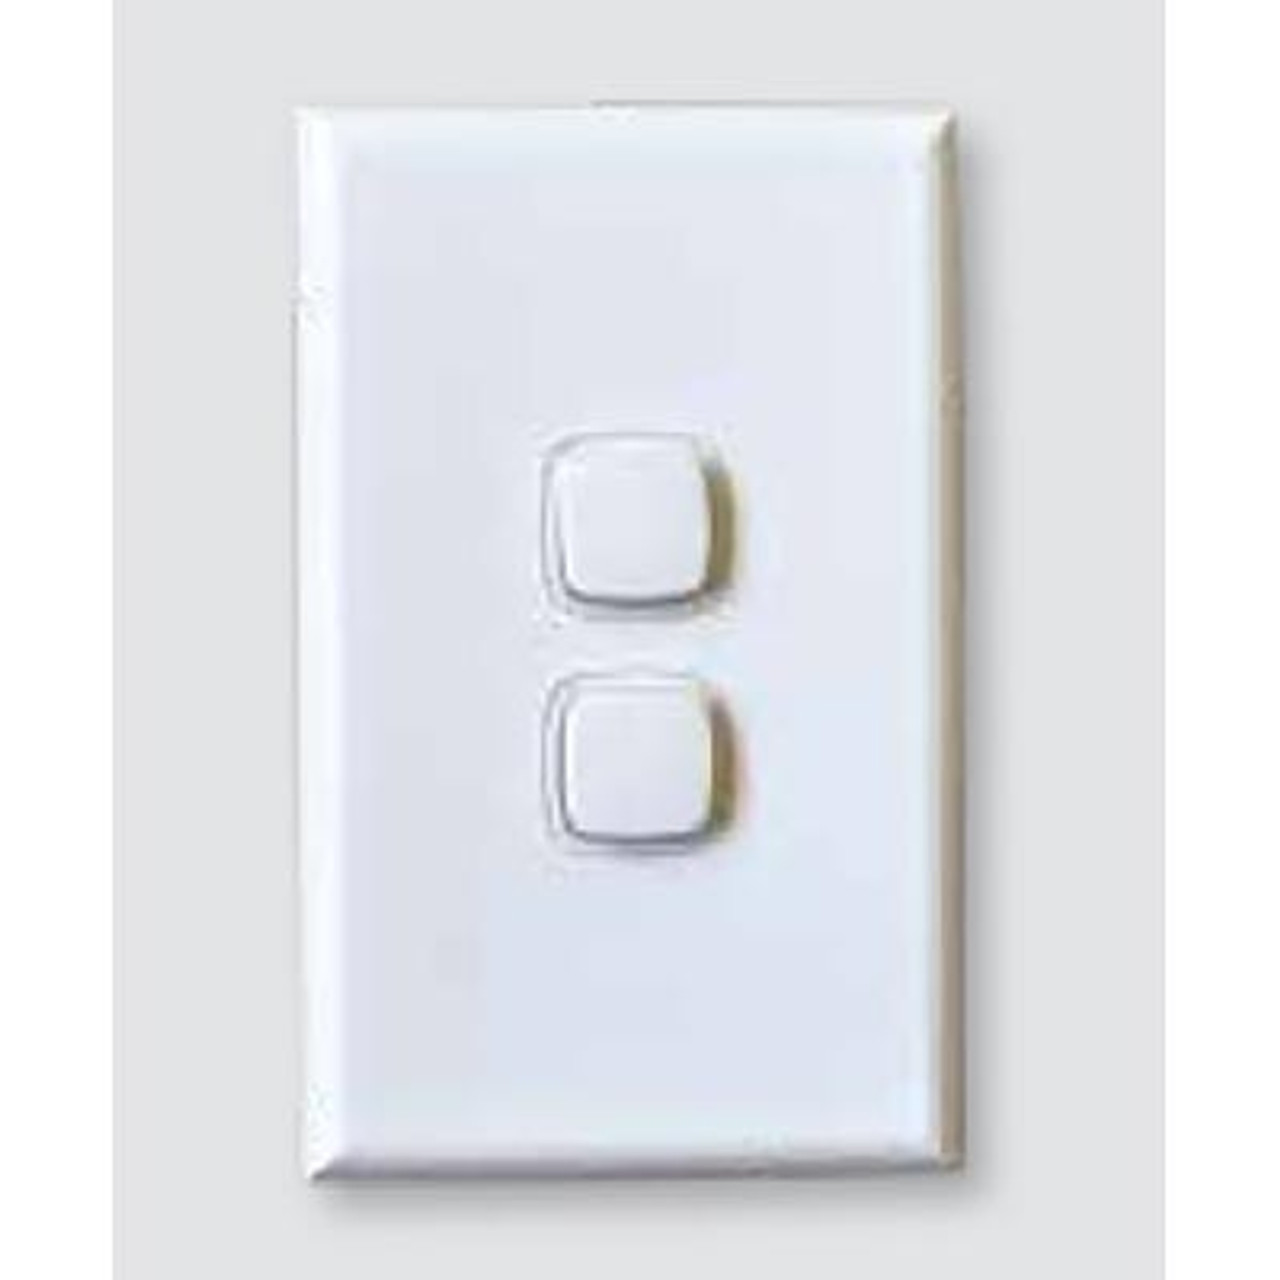 ST Two Button Impulse Wall Switch